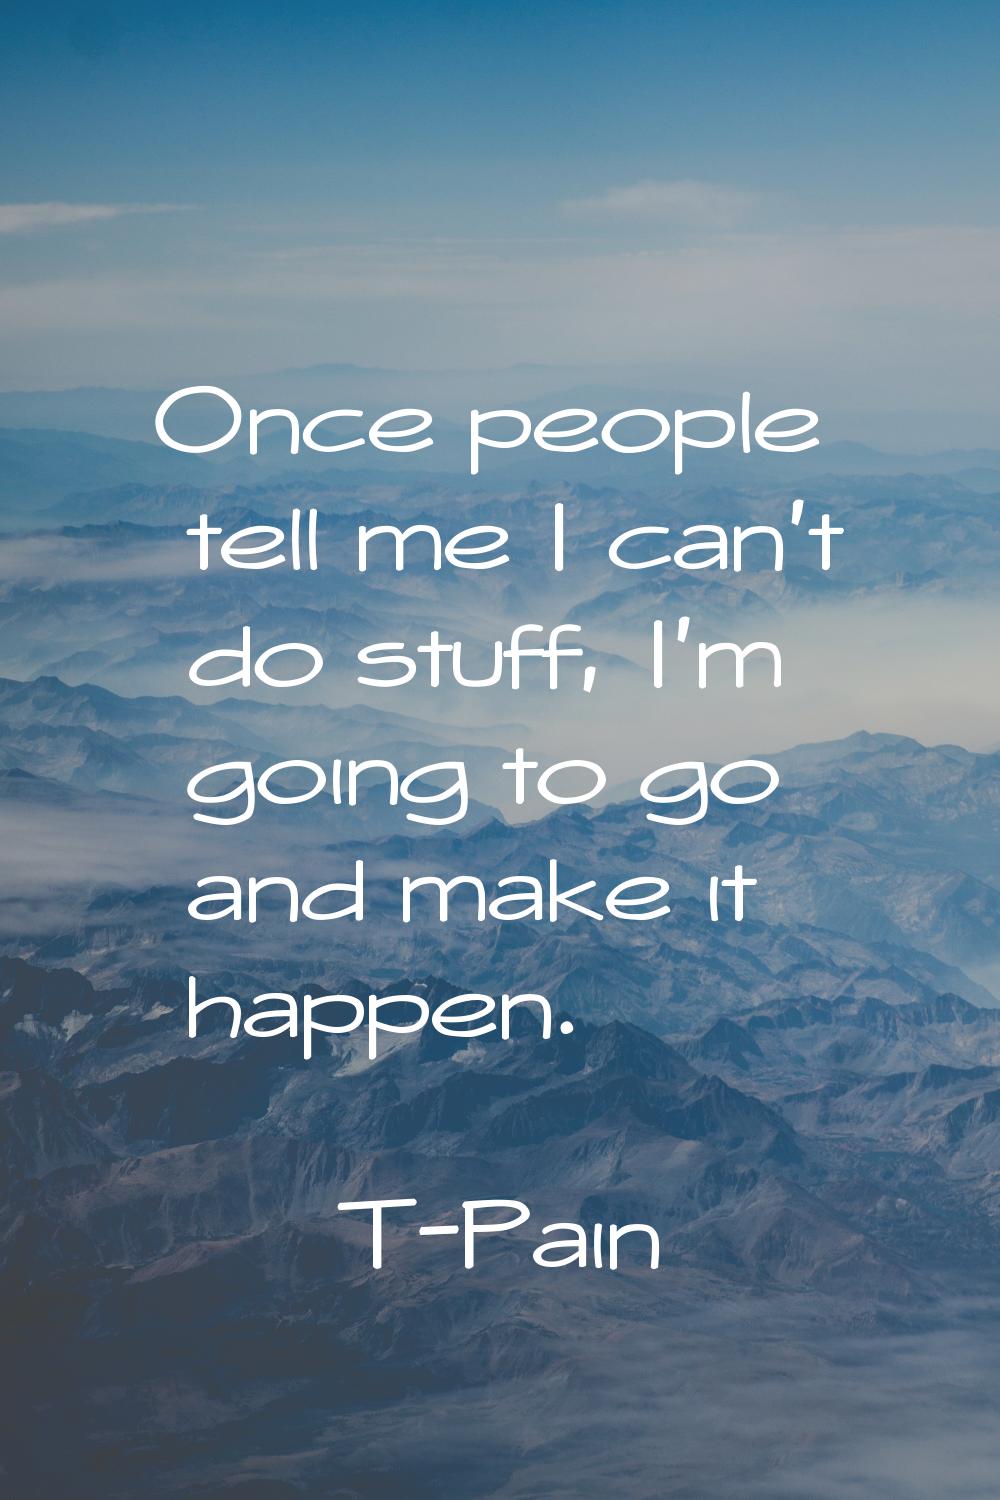 Once people tell me I can't do stuff, I'm going to go and make it happen.